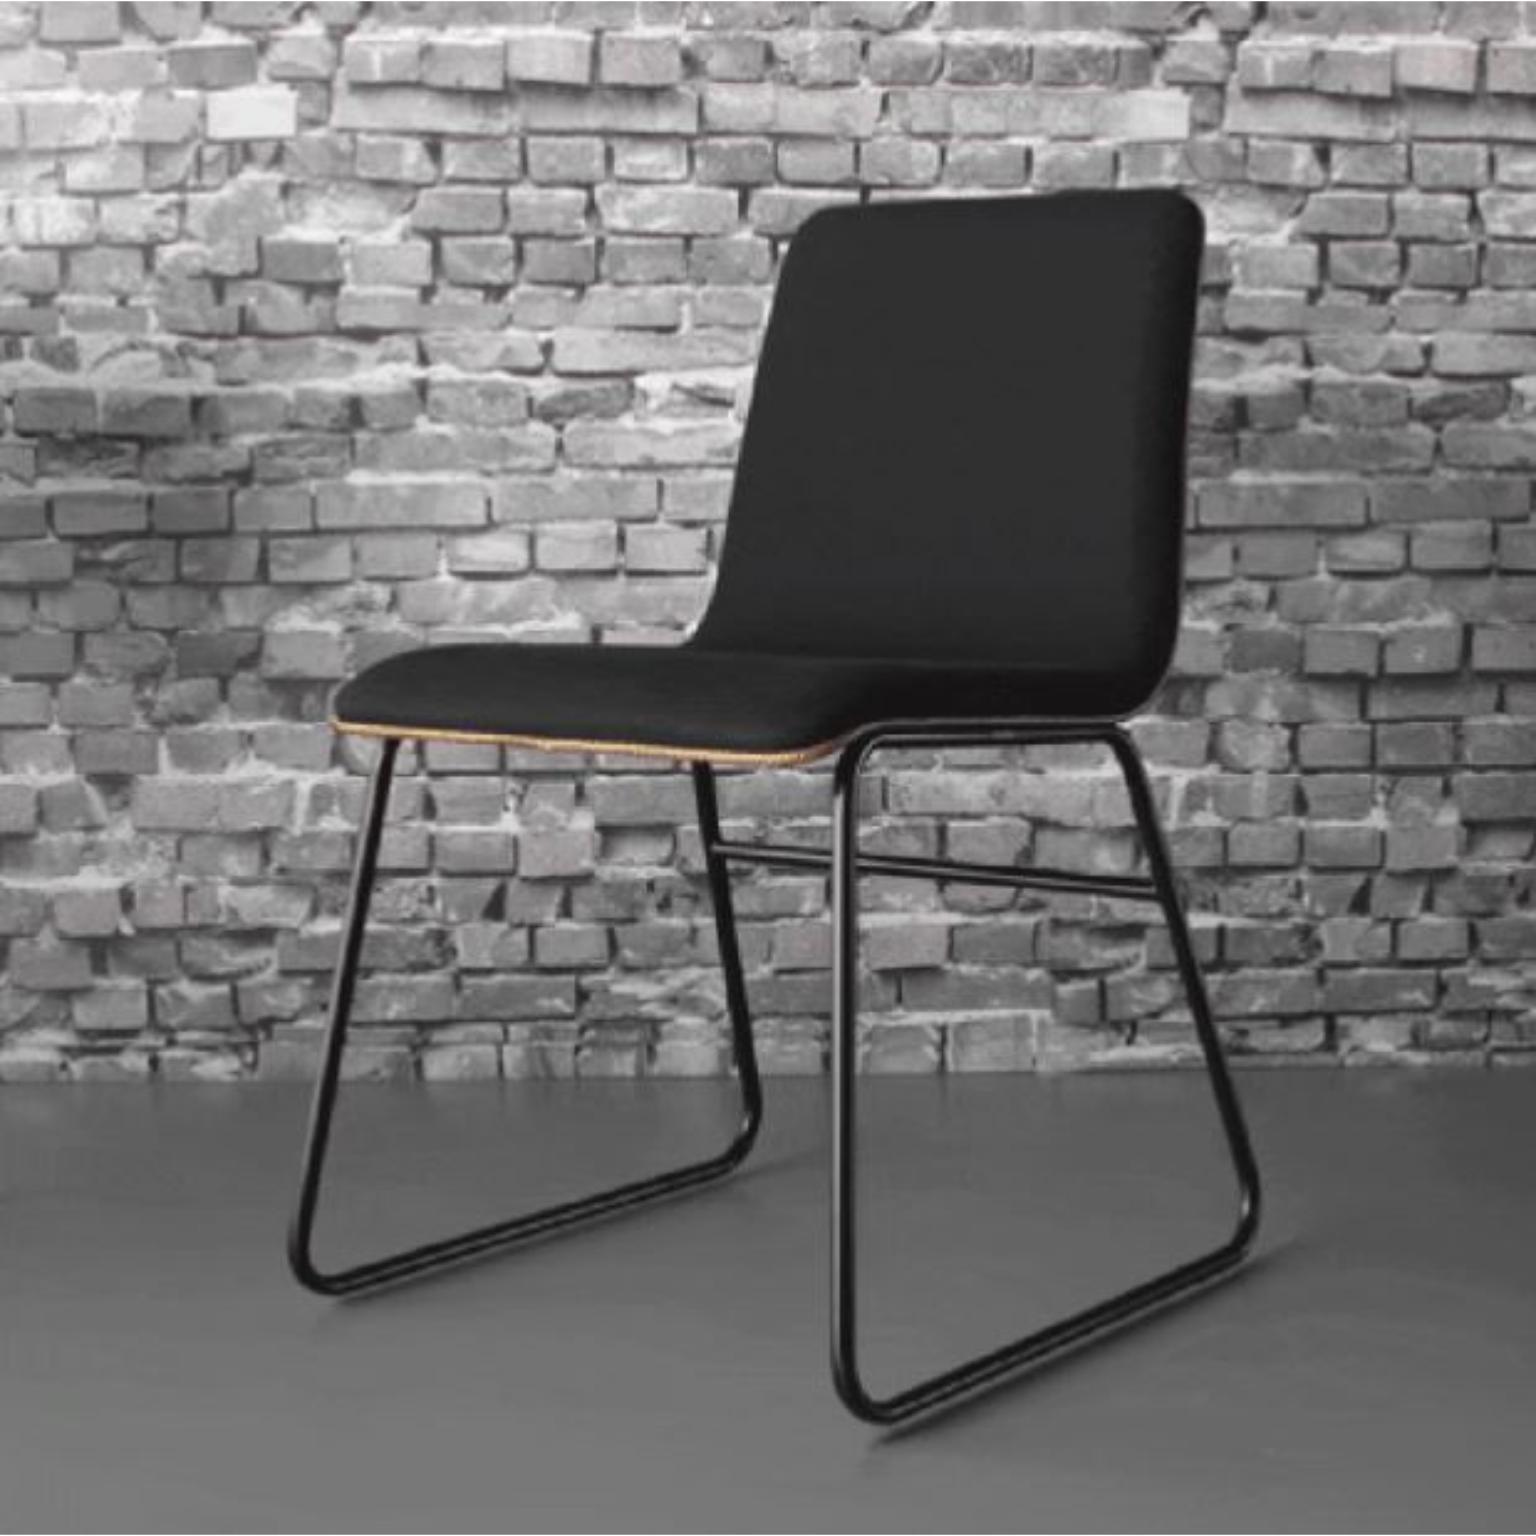 Presto Chair by Doimo Brasil
Dimensions: W 50 x D 53 x H 81 cm 
Materials: Metal, upholstered seat. 


With the intention of providing good taste and personality, Doimo deciphers trends and follows the evolution of man and his space. To this end, it